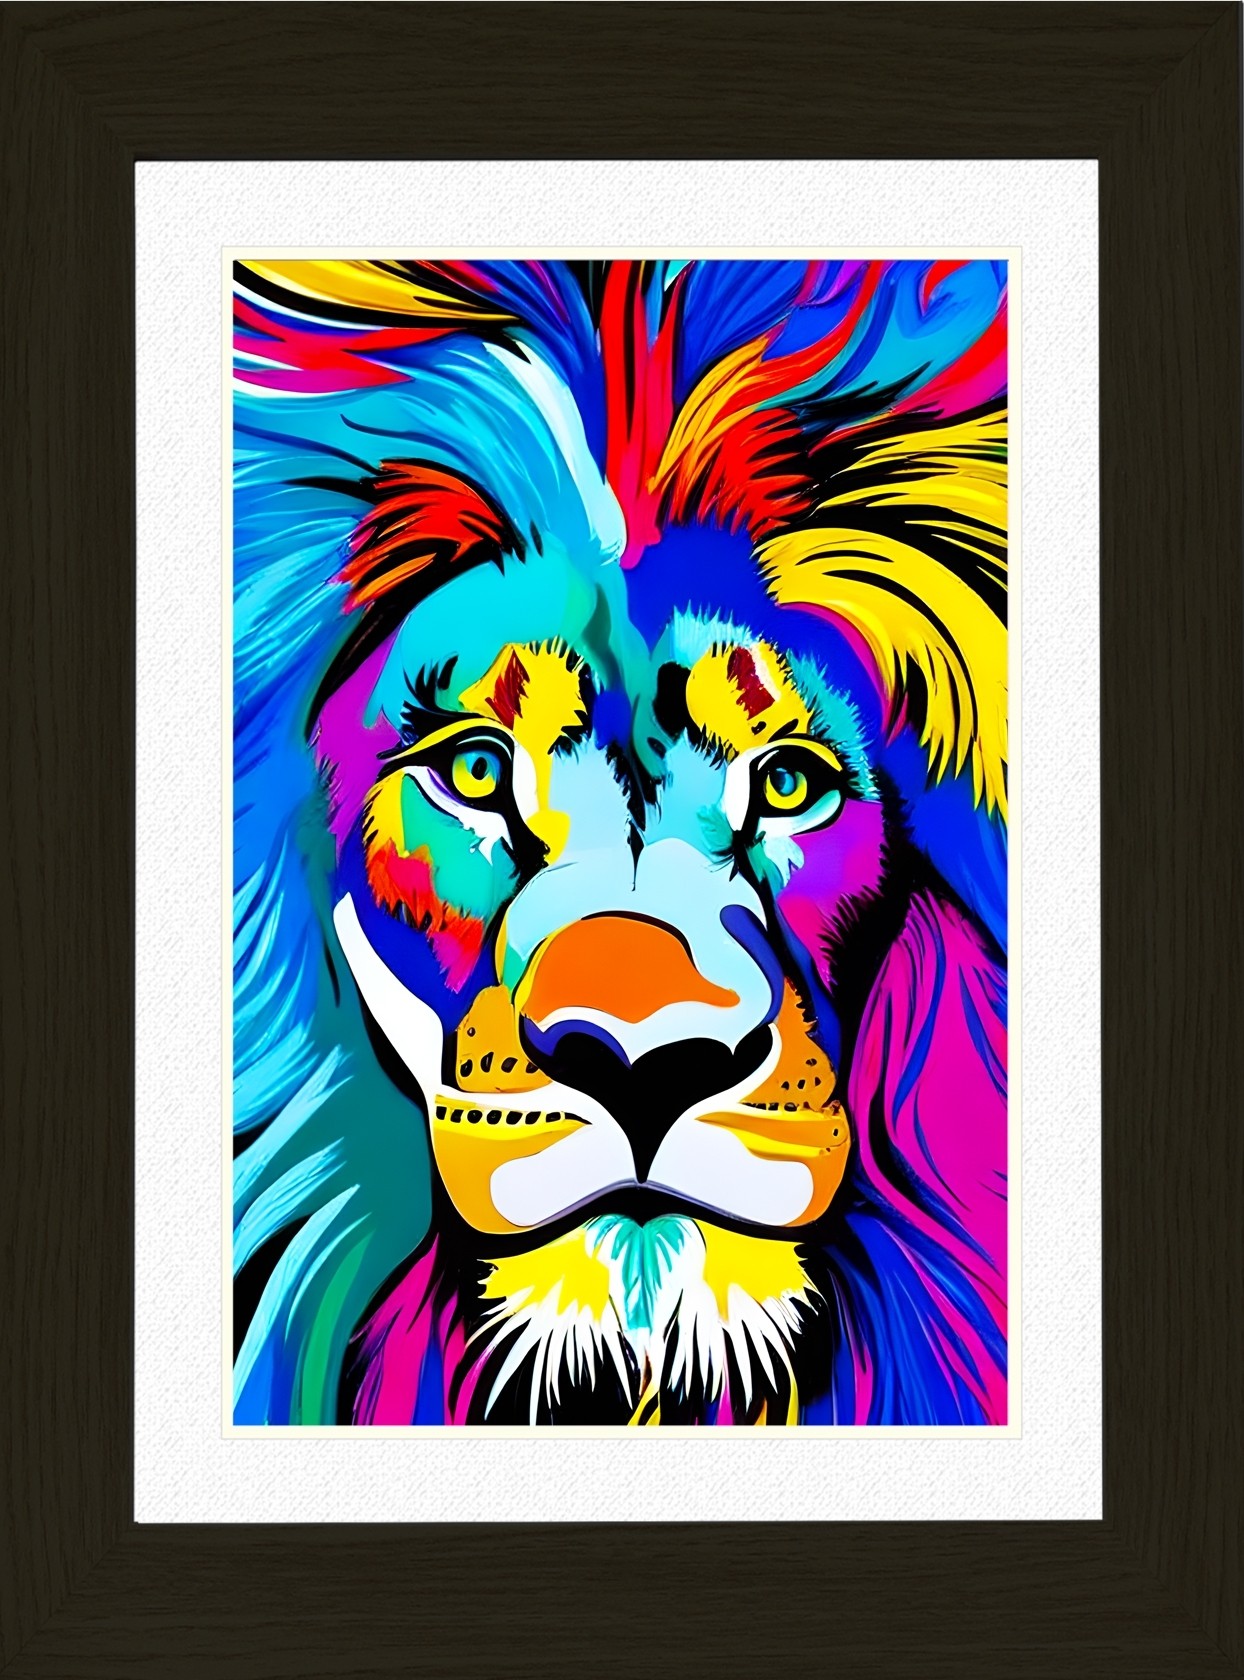 Lion Animal Picture Framed Colourful Abstract Art (25cm x 20cm Black Frame)